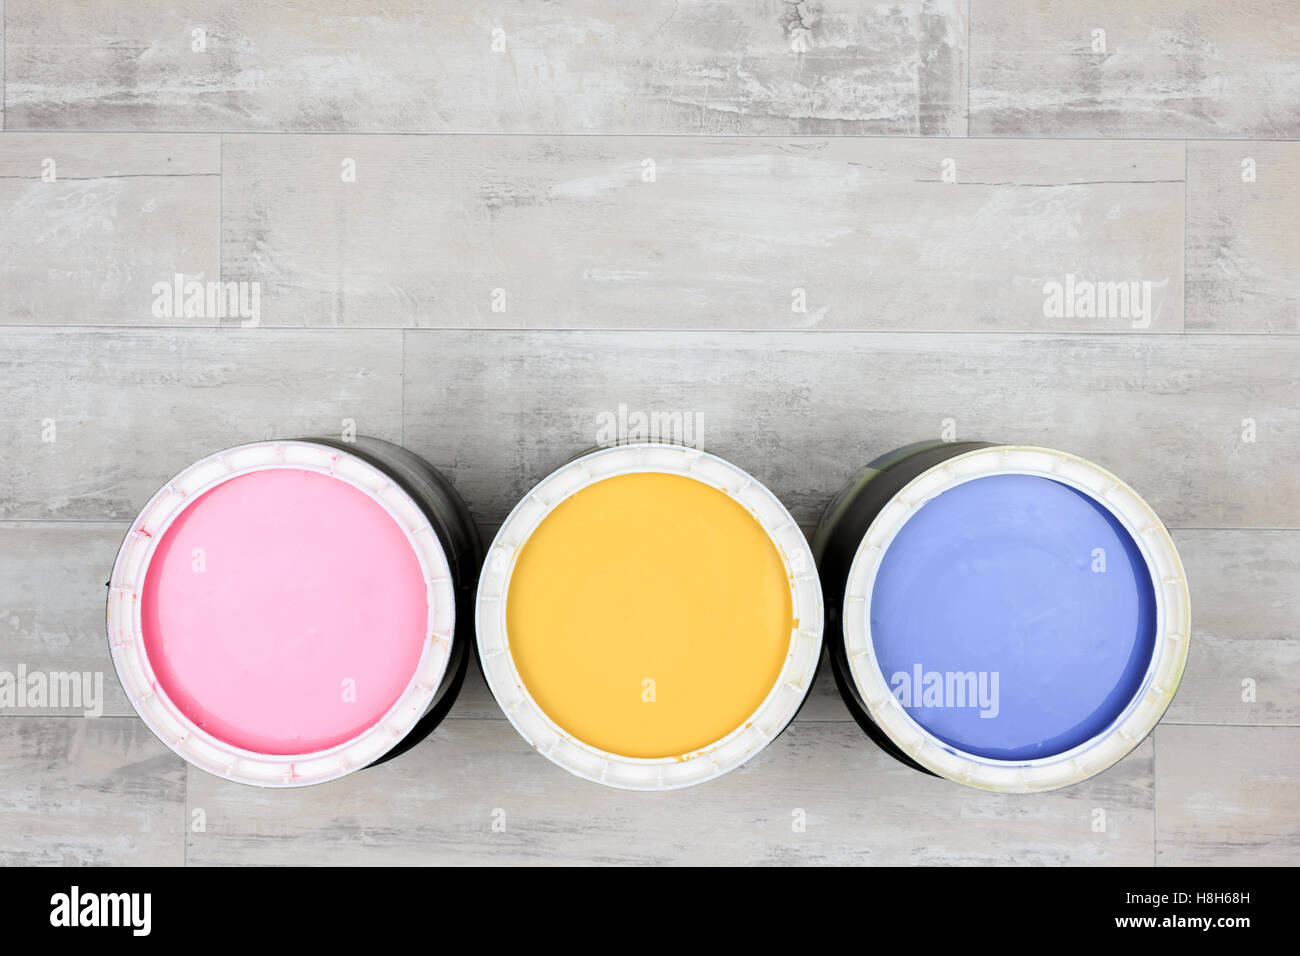 Looking down on three open paint cans of coloured paint stood on a shabby style wood floor Stock Photo